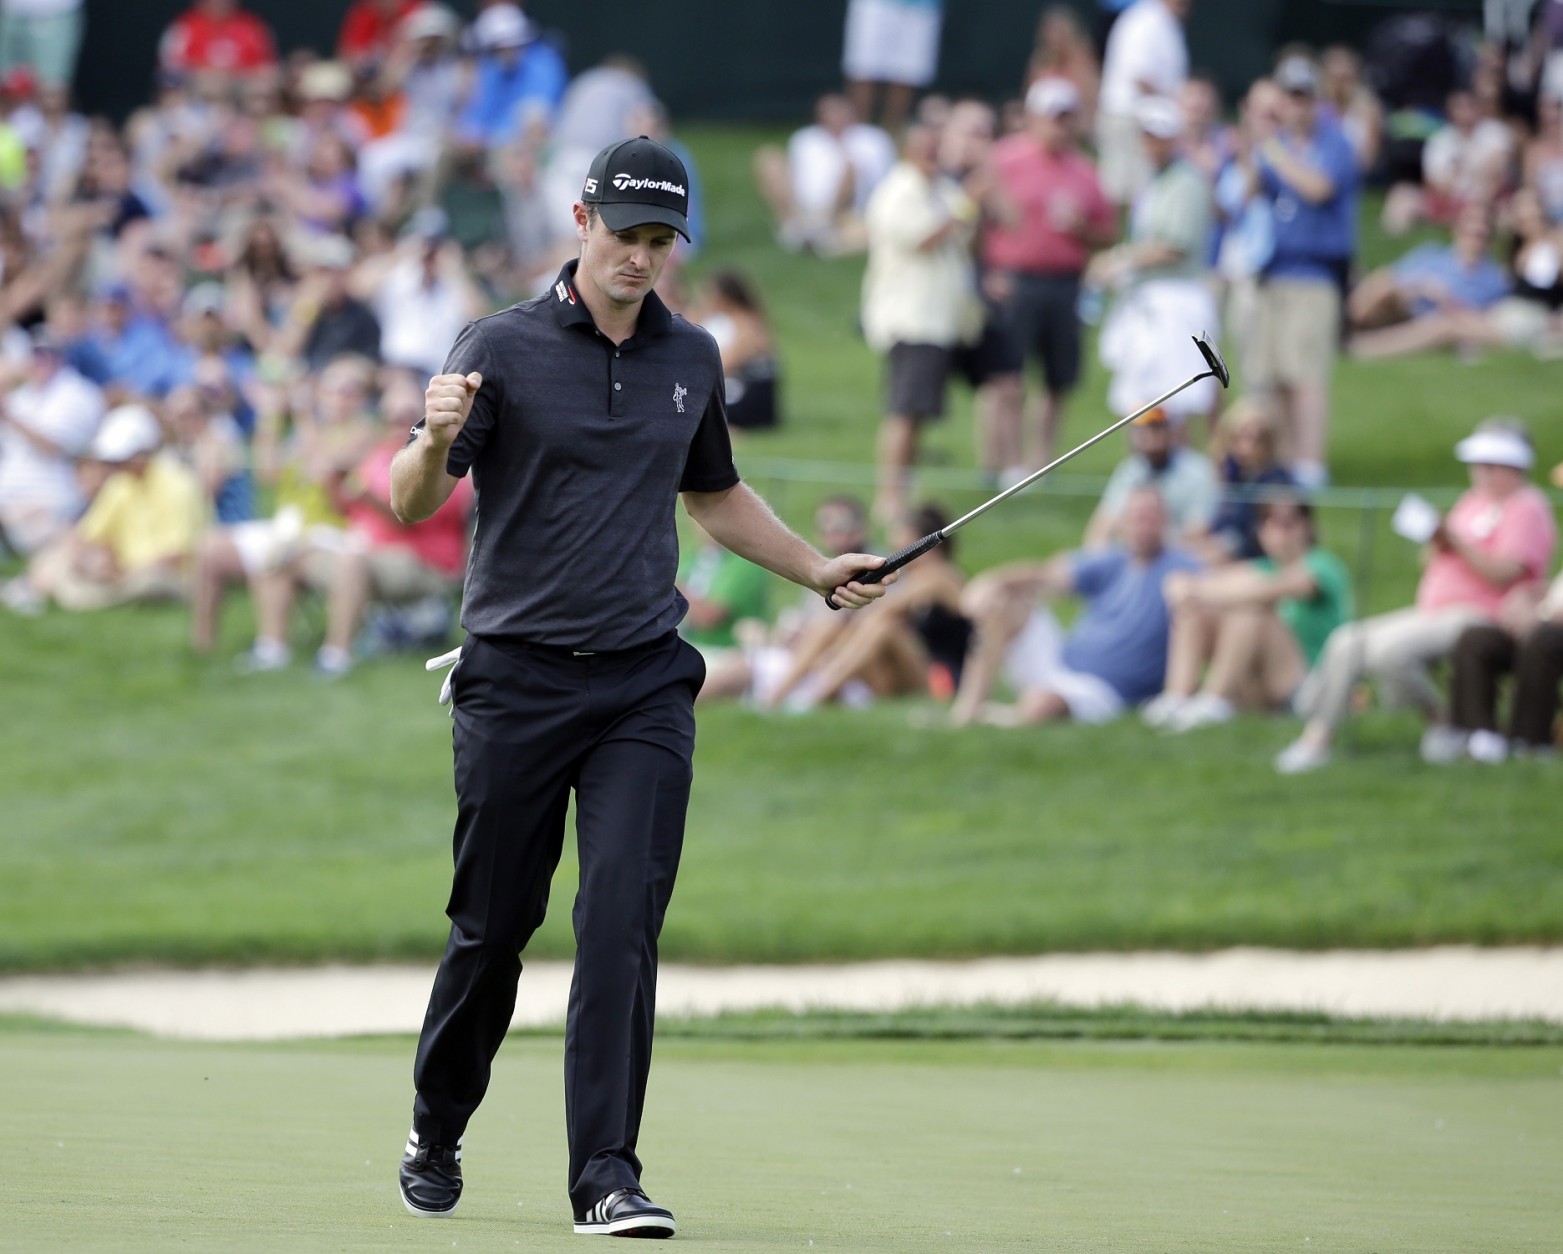 Justin Rose, of England, reacts after making a birdie on the 14th hole during the third round of the Memorial golf tournament Saturday, June 6, 2015, in Dublin, Ohio. (AP Photo/Darron Cummings)